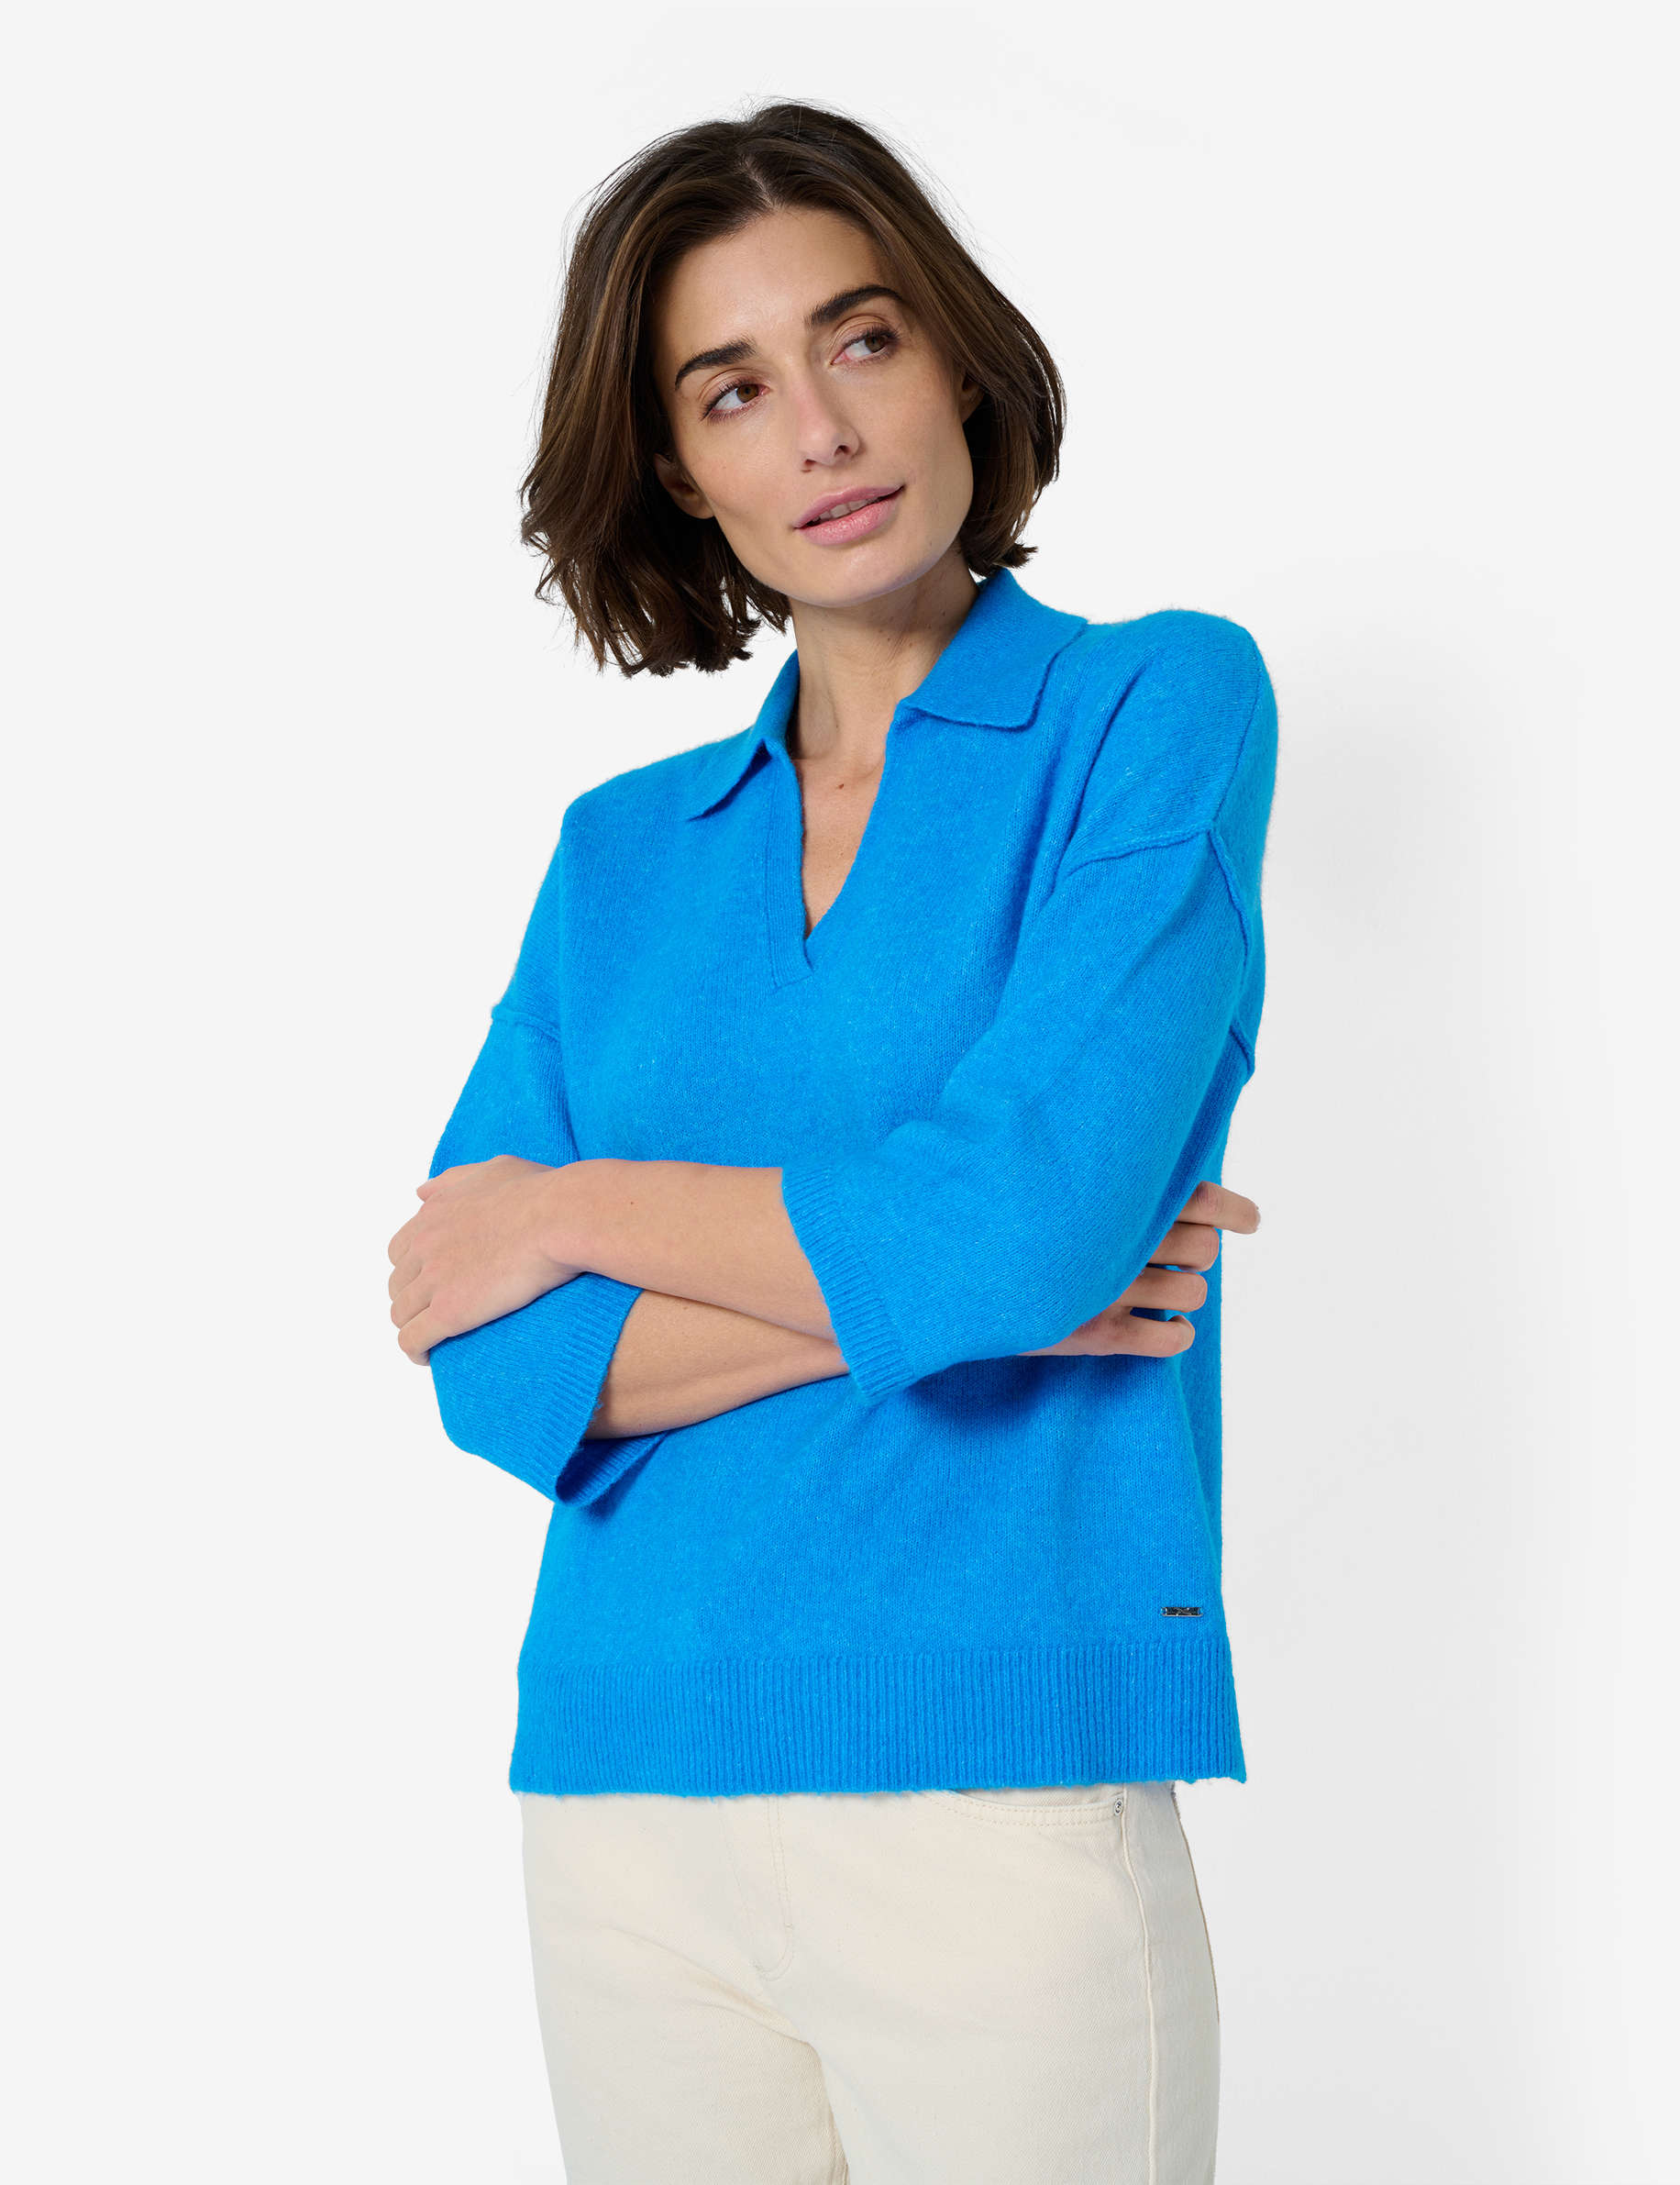 Shades of Blue, Women, Style LILLY, MODEL_FRONT_ISHOP